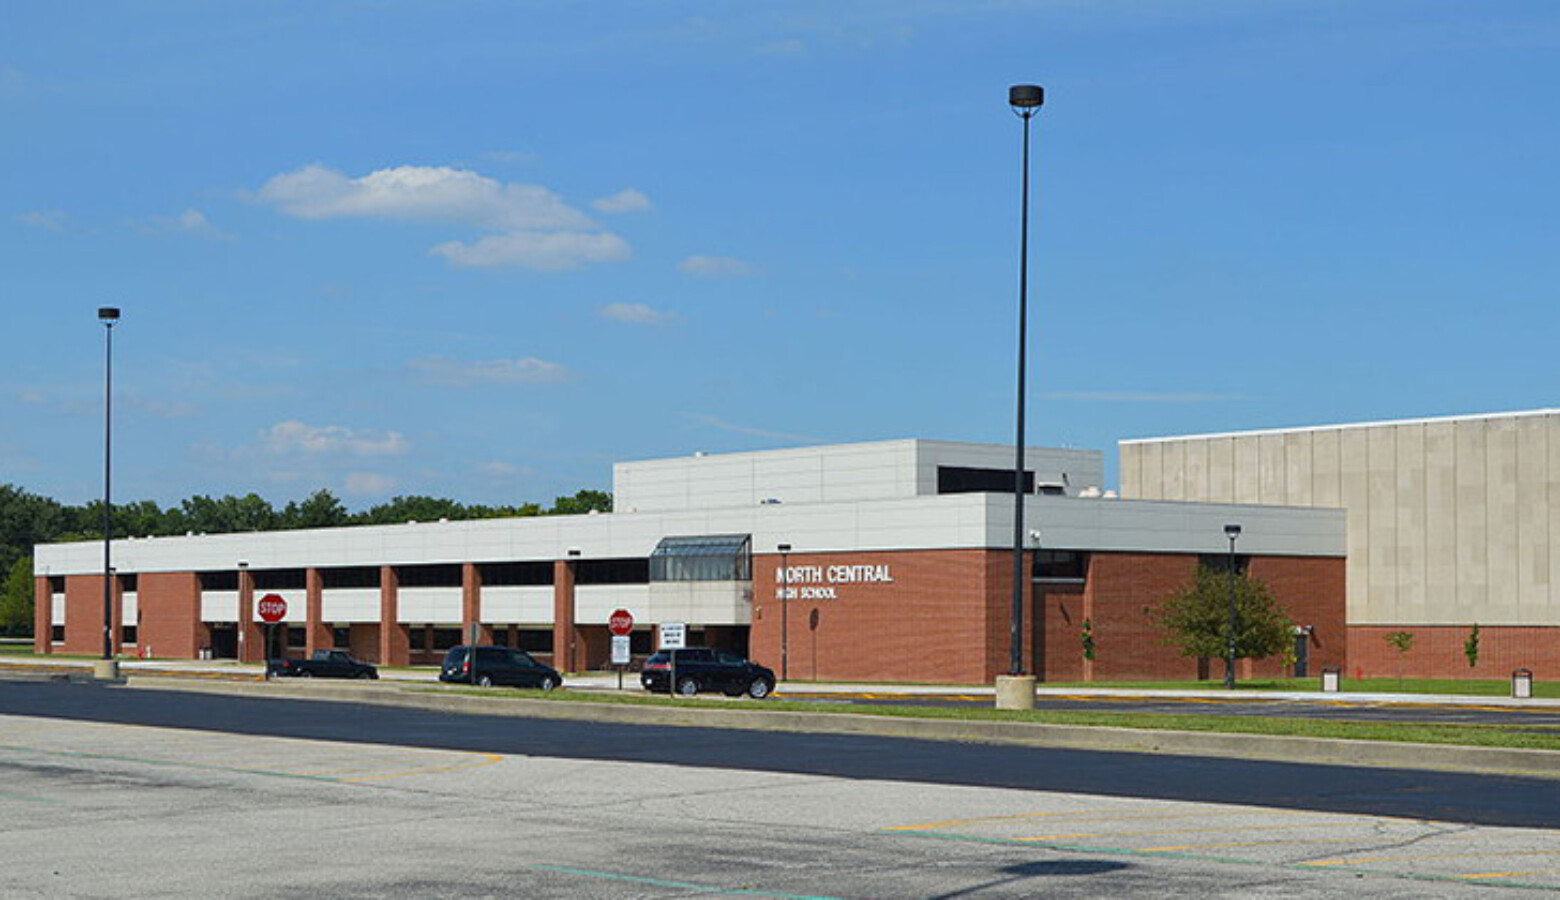 Washington Township Schools enrolls around 11,100 students in grades K-12 in 13 schools, including more than 3,700 students at North Central High School.